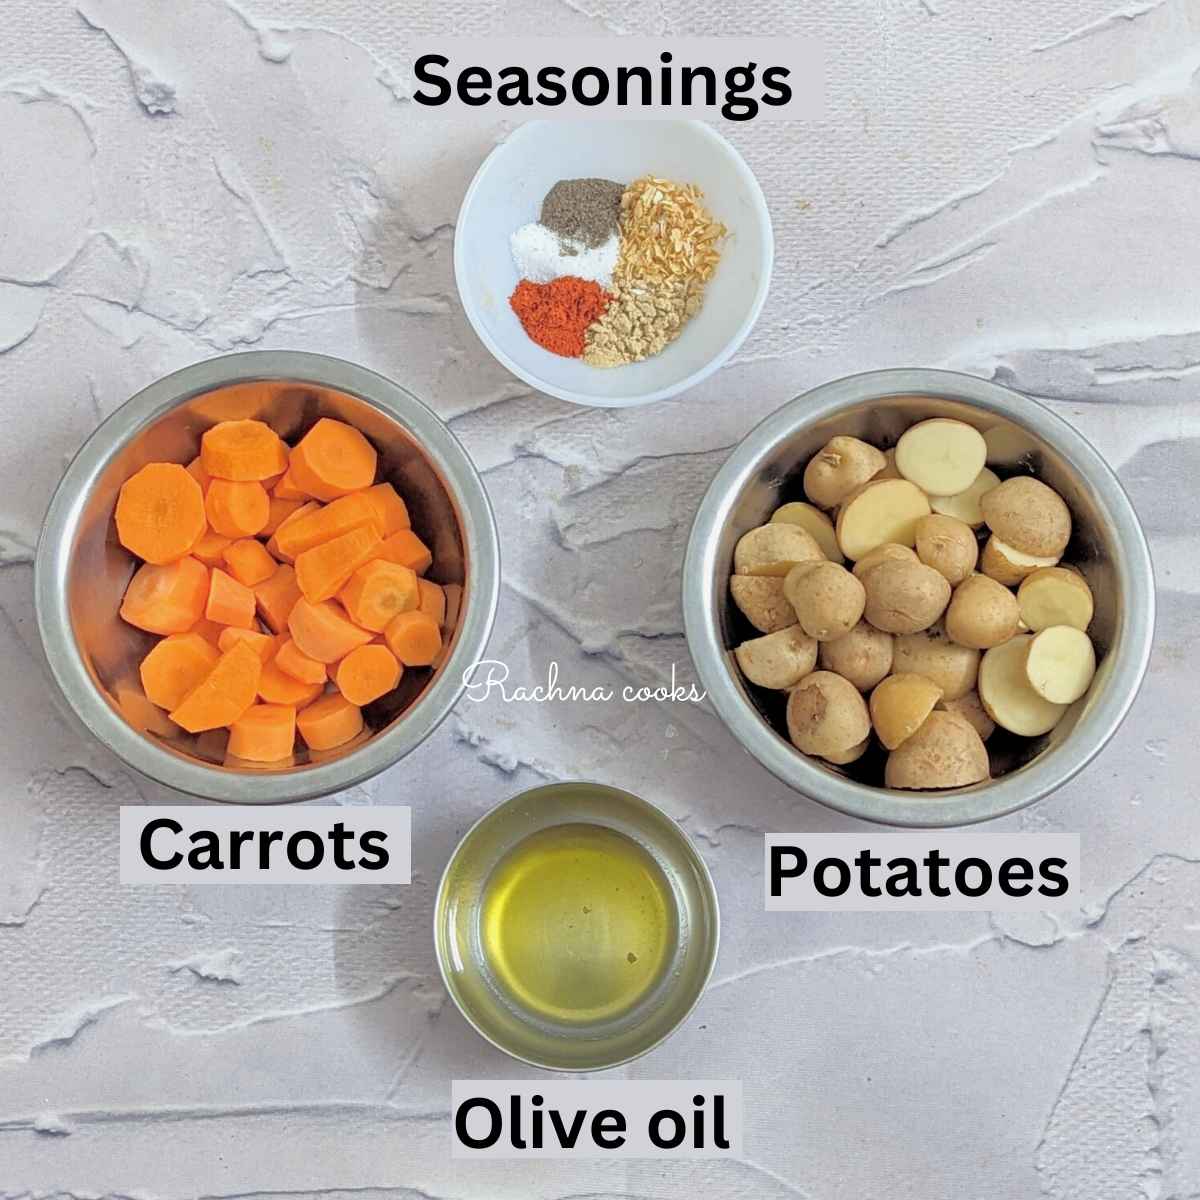 Ingredients for air fryer carrots and potatoes: carrots, potatoes, seasonings and olive oil in different bowls.